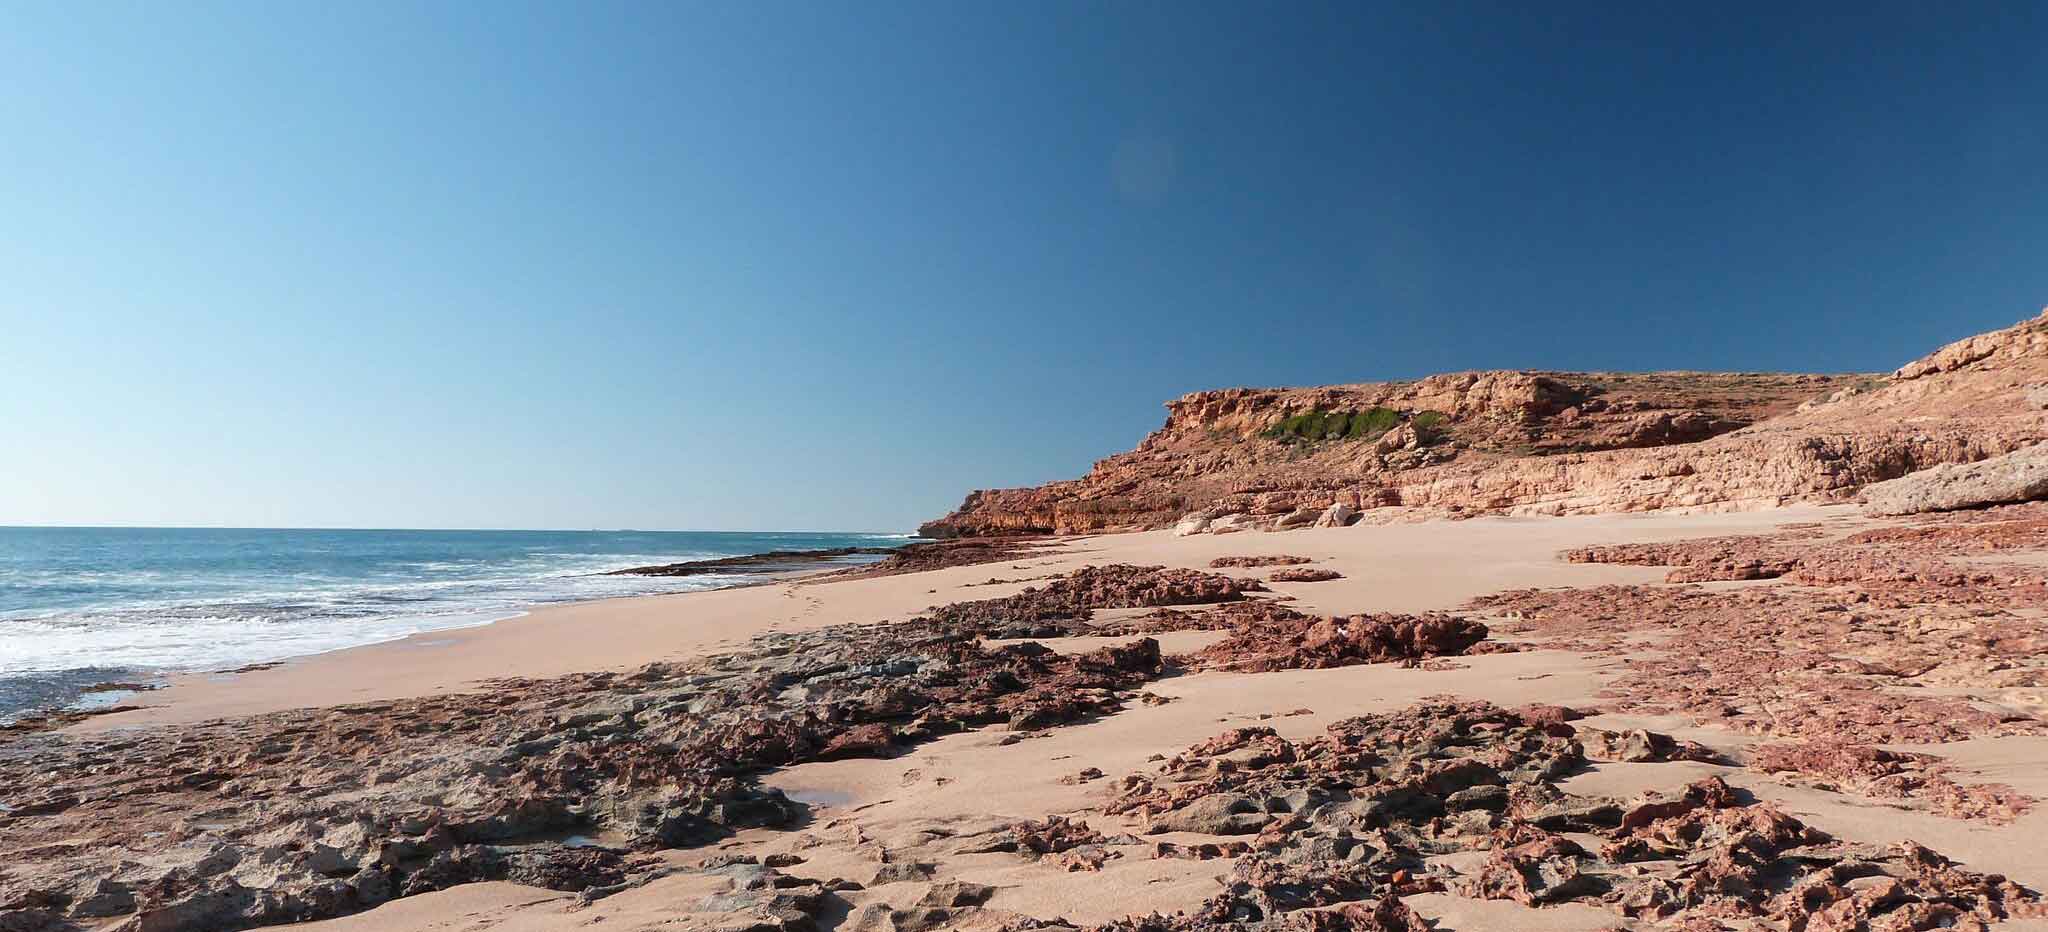 main image for article: Evidence of earliest Aboriginal occupation of Australian coast